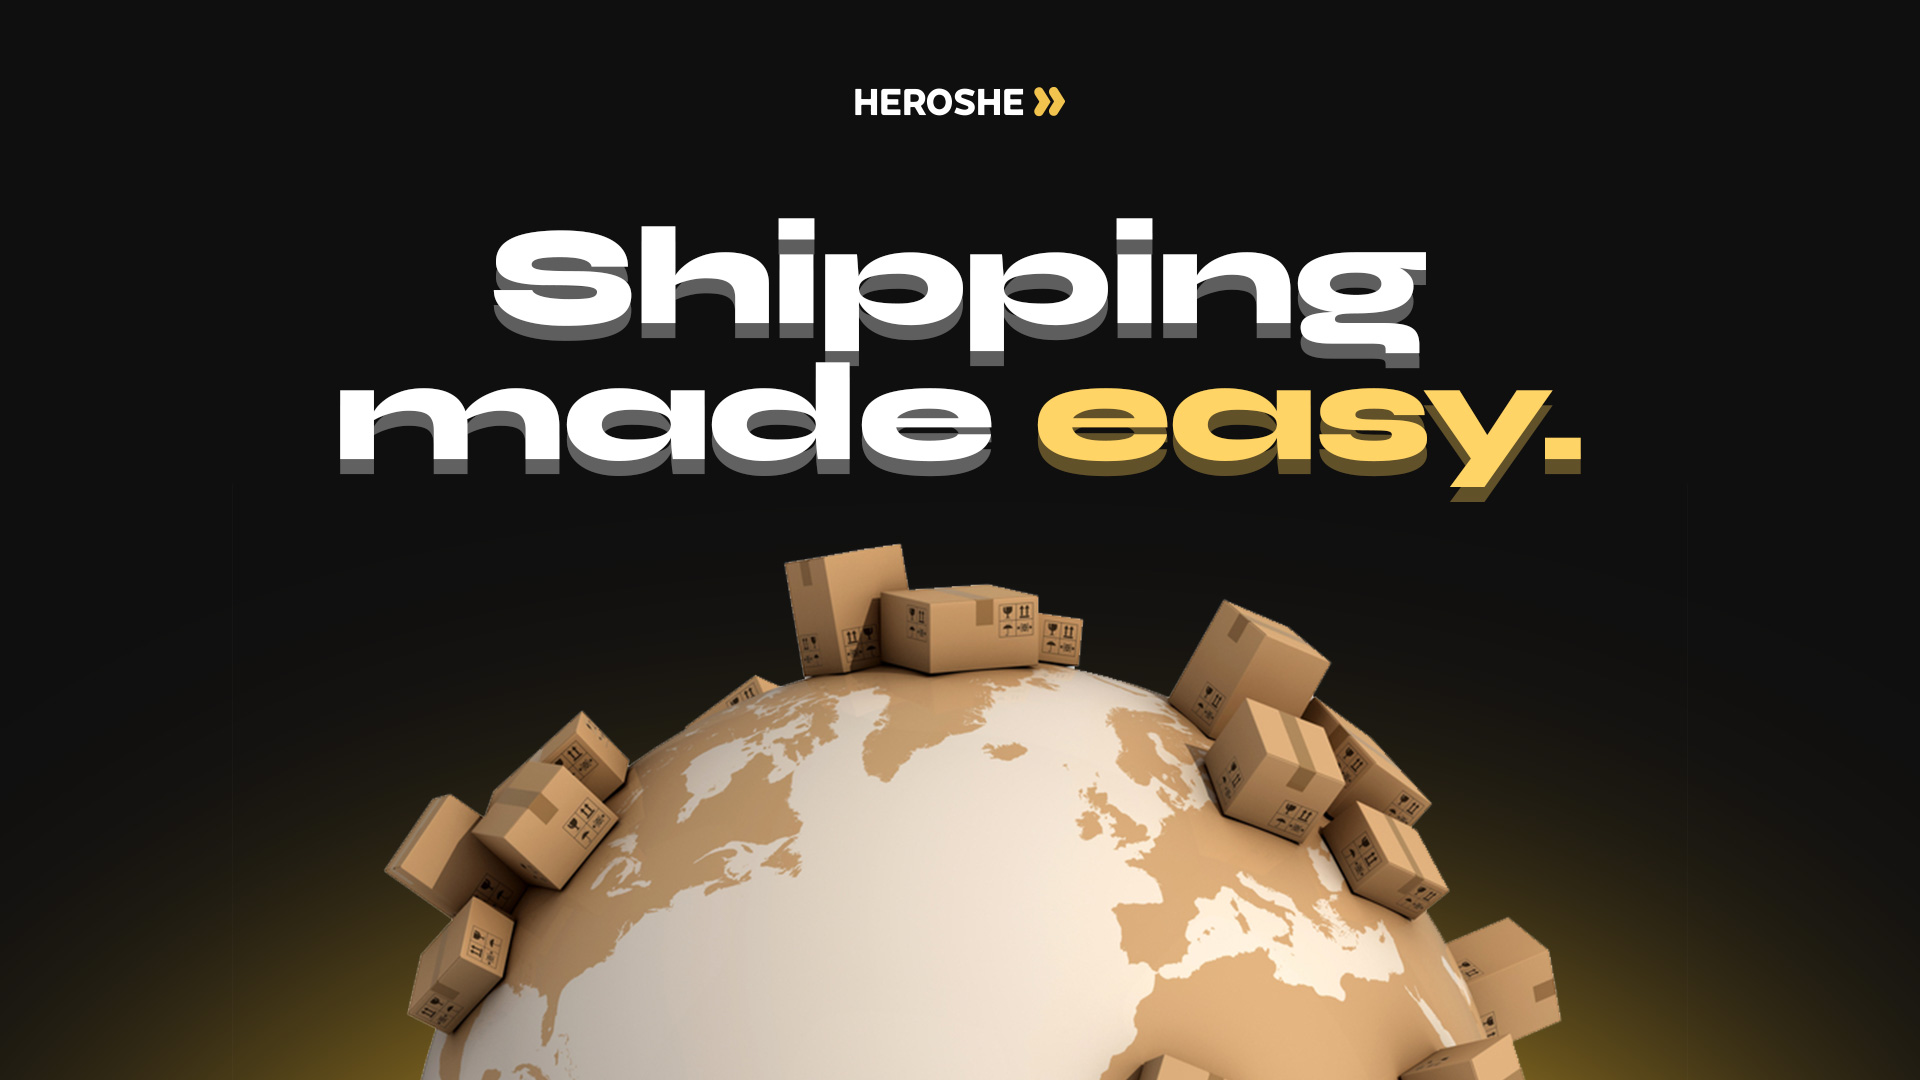 Shpping made easy with Heroshe